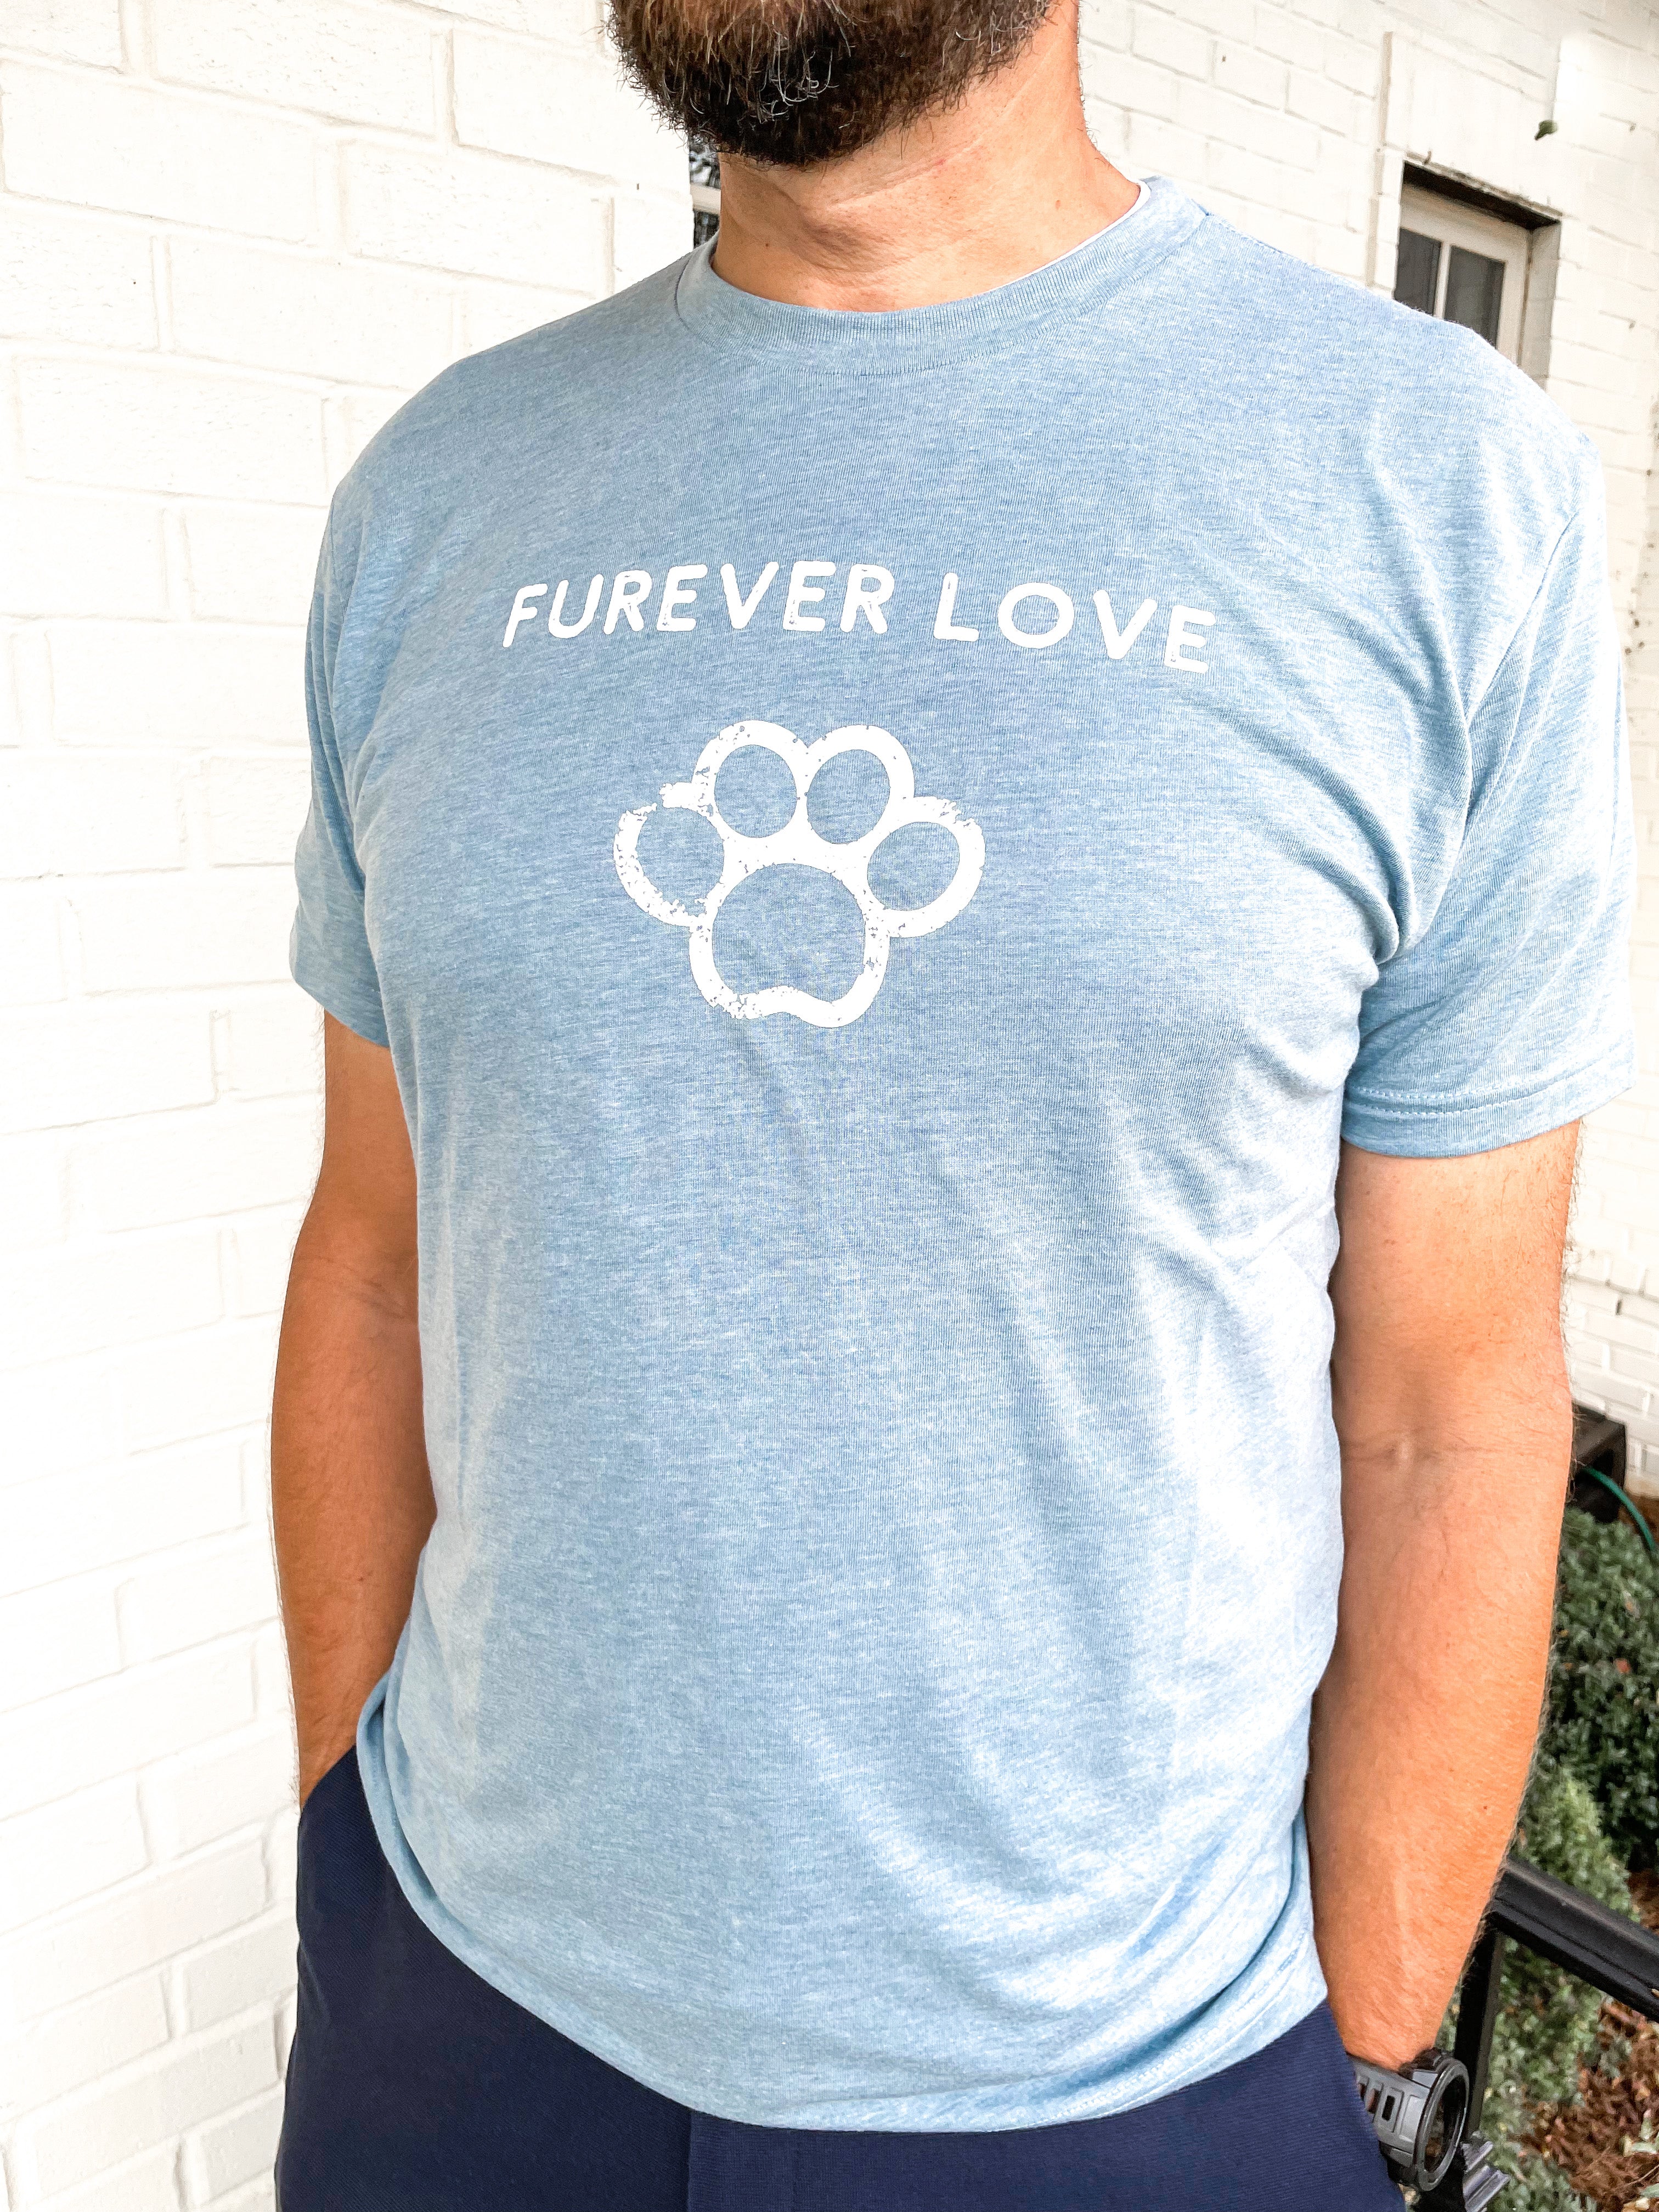 man wearing a screen printed tshirt with the saying FUREVER LOVE, and a graphic of a paw on it.  all white ink printing, on a light blue tshirt.